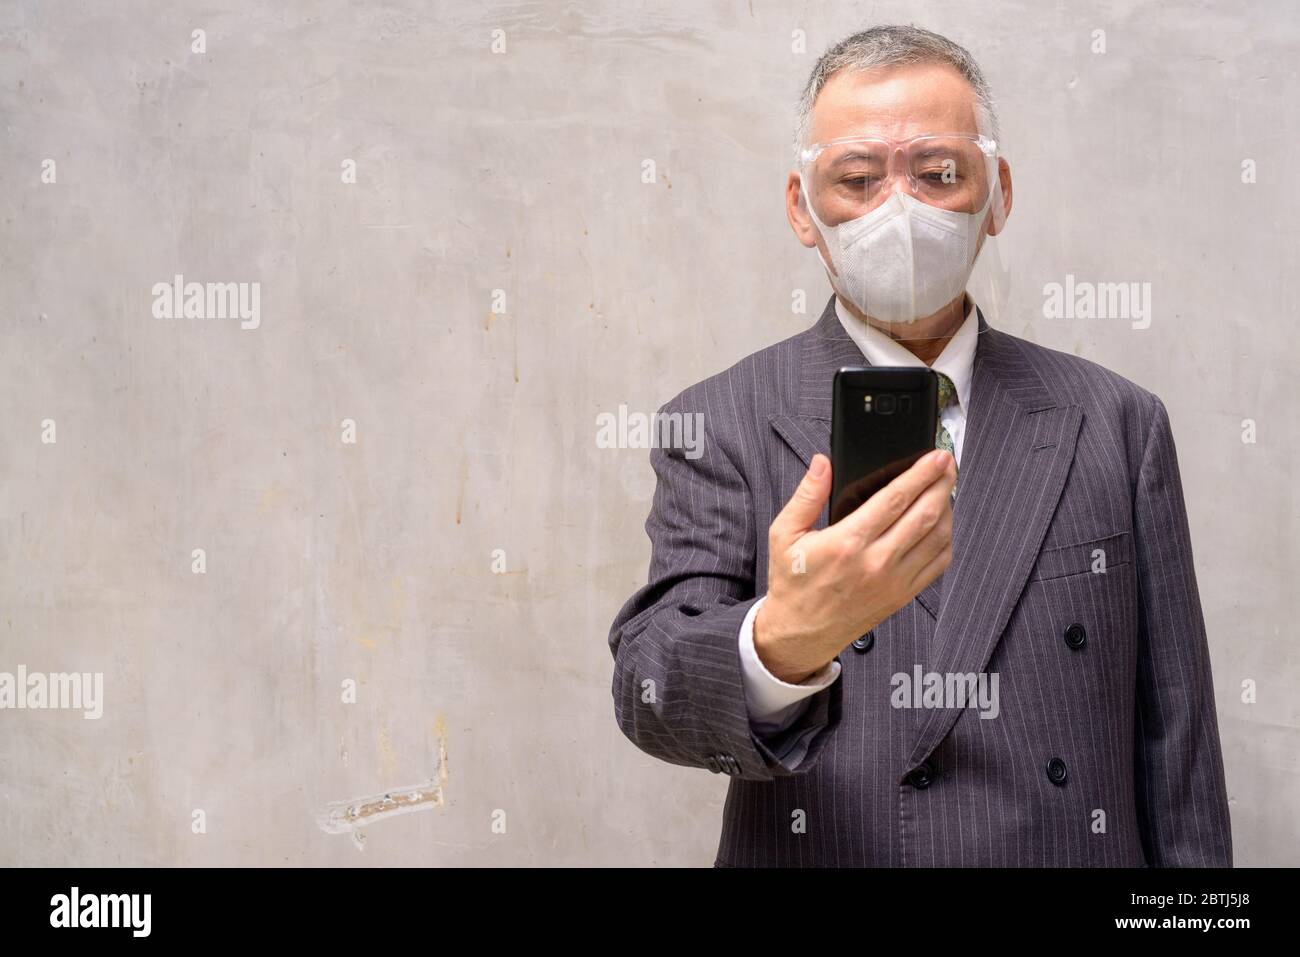 Mature Japanese businessman with mask and face shield using phone Stock Photo